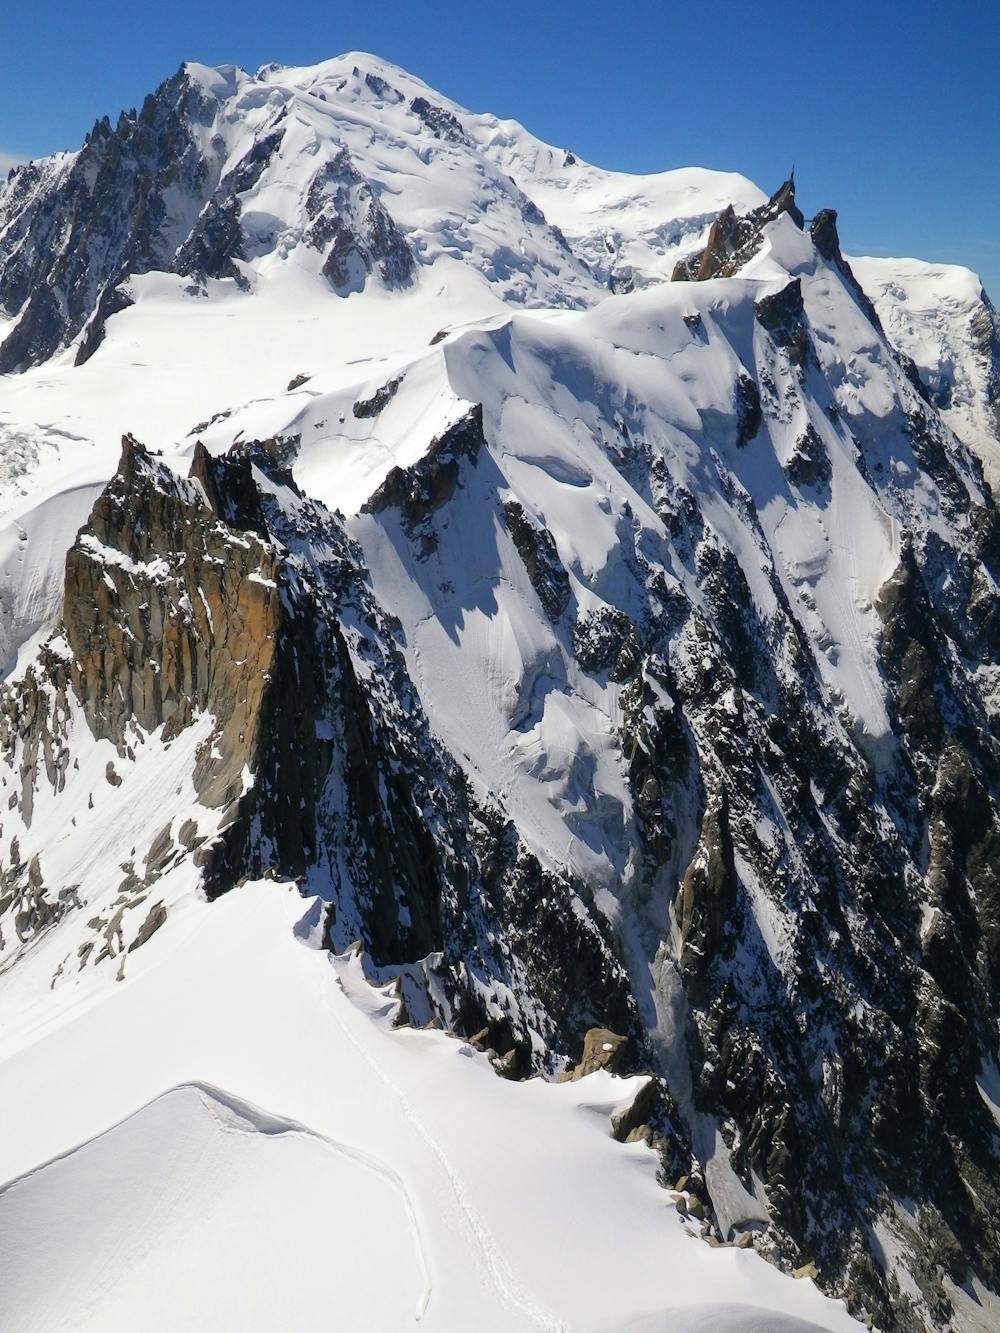 Looking back along the traverse from the Aiguille du Plan's summit.